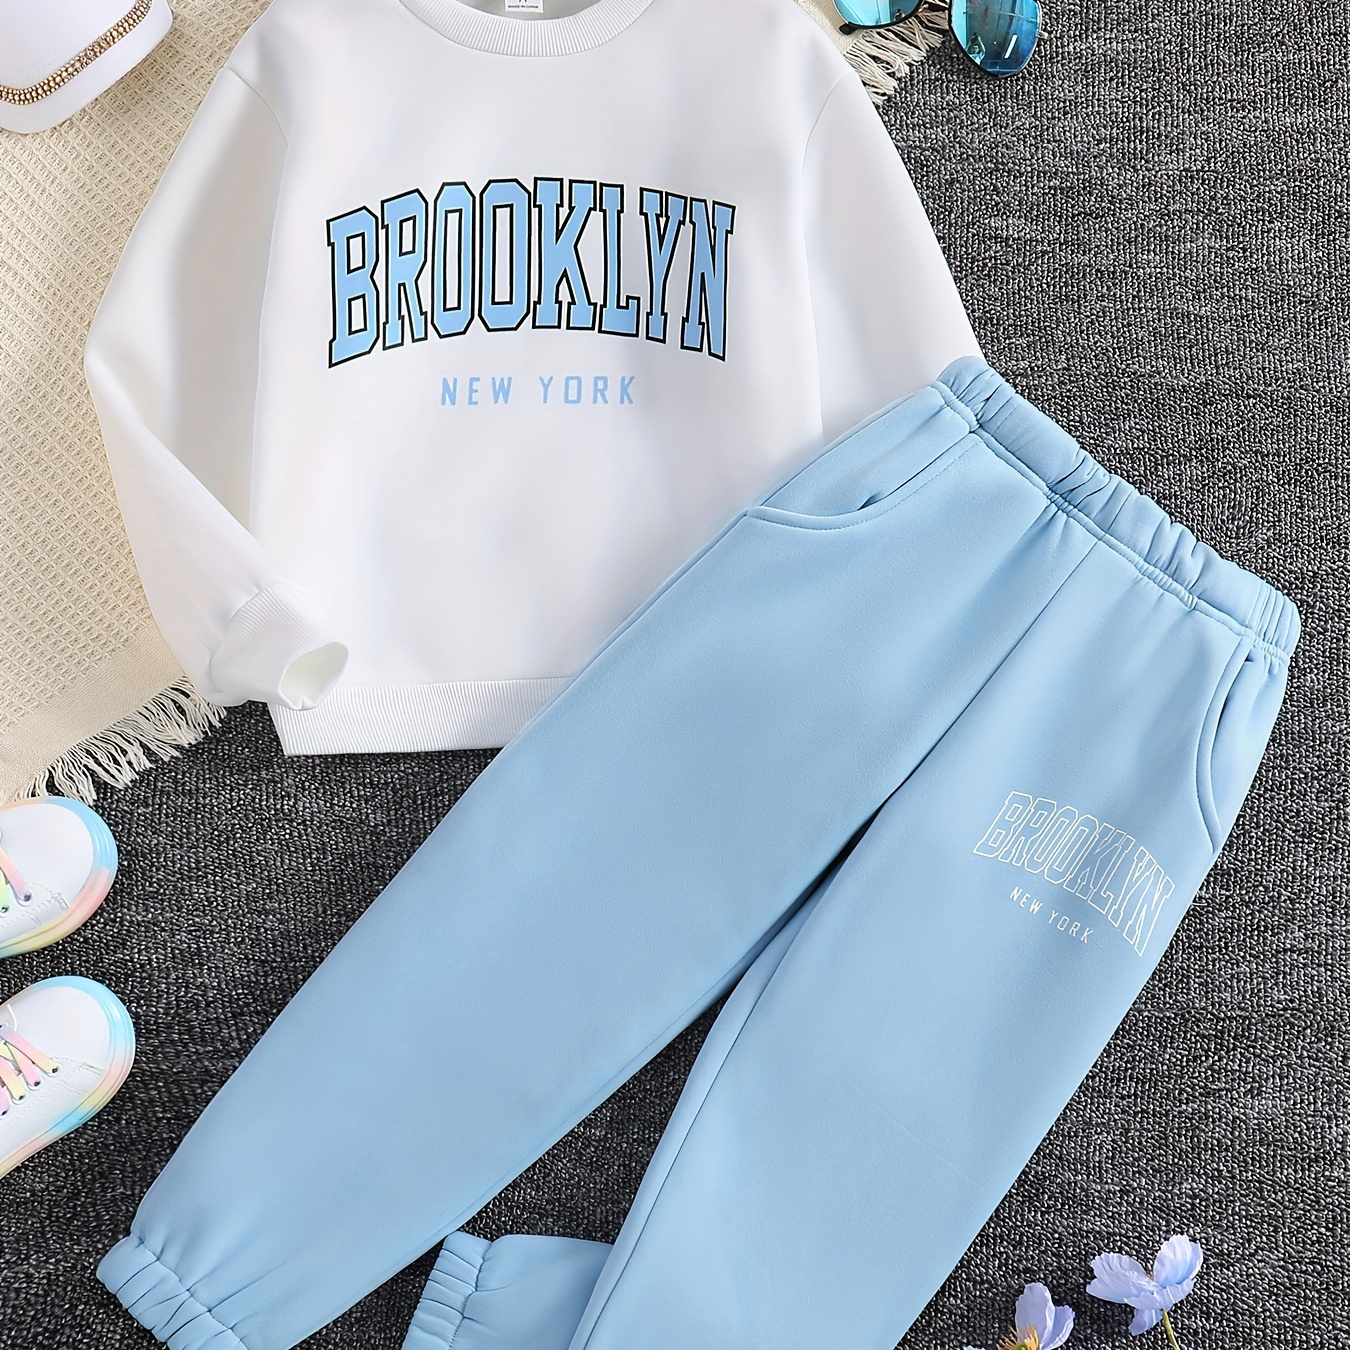 

Girls 2pcs, Brooklyn Print Sweatshirt Top & Jogger Pants With Pocket For Fall Sports Gift Kids Clothes